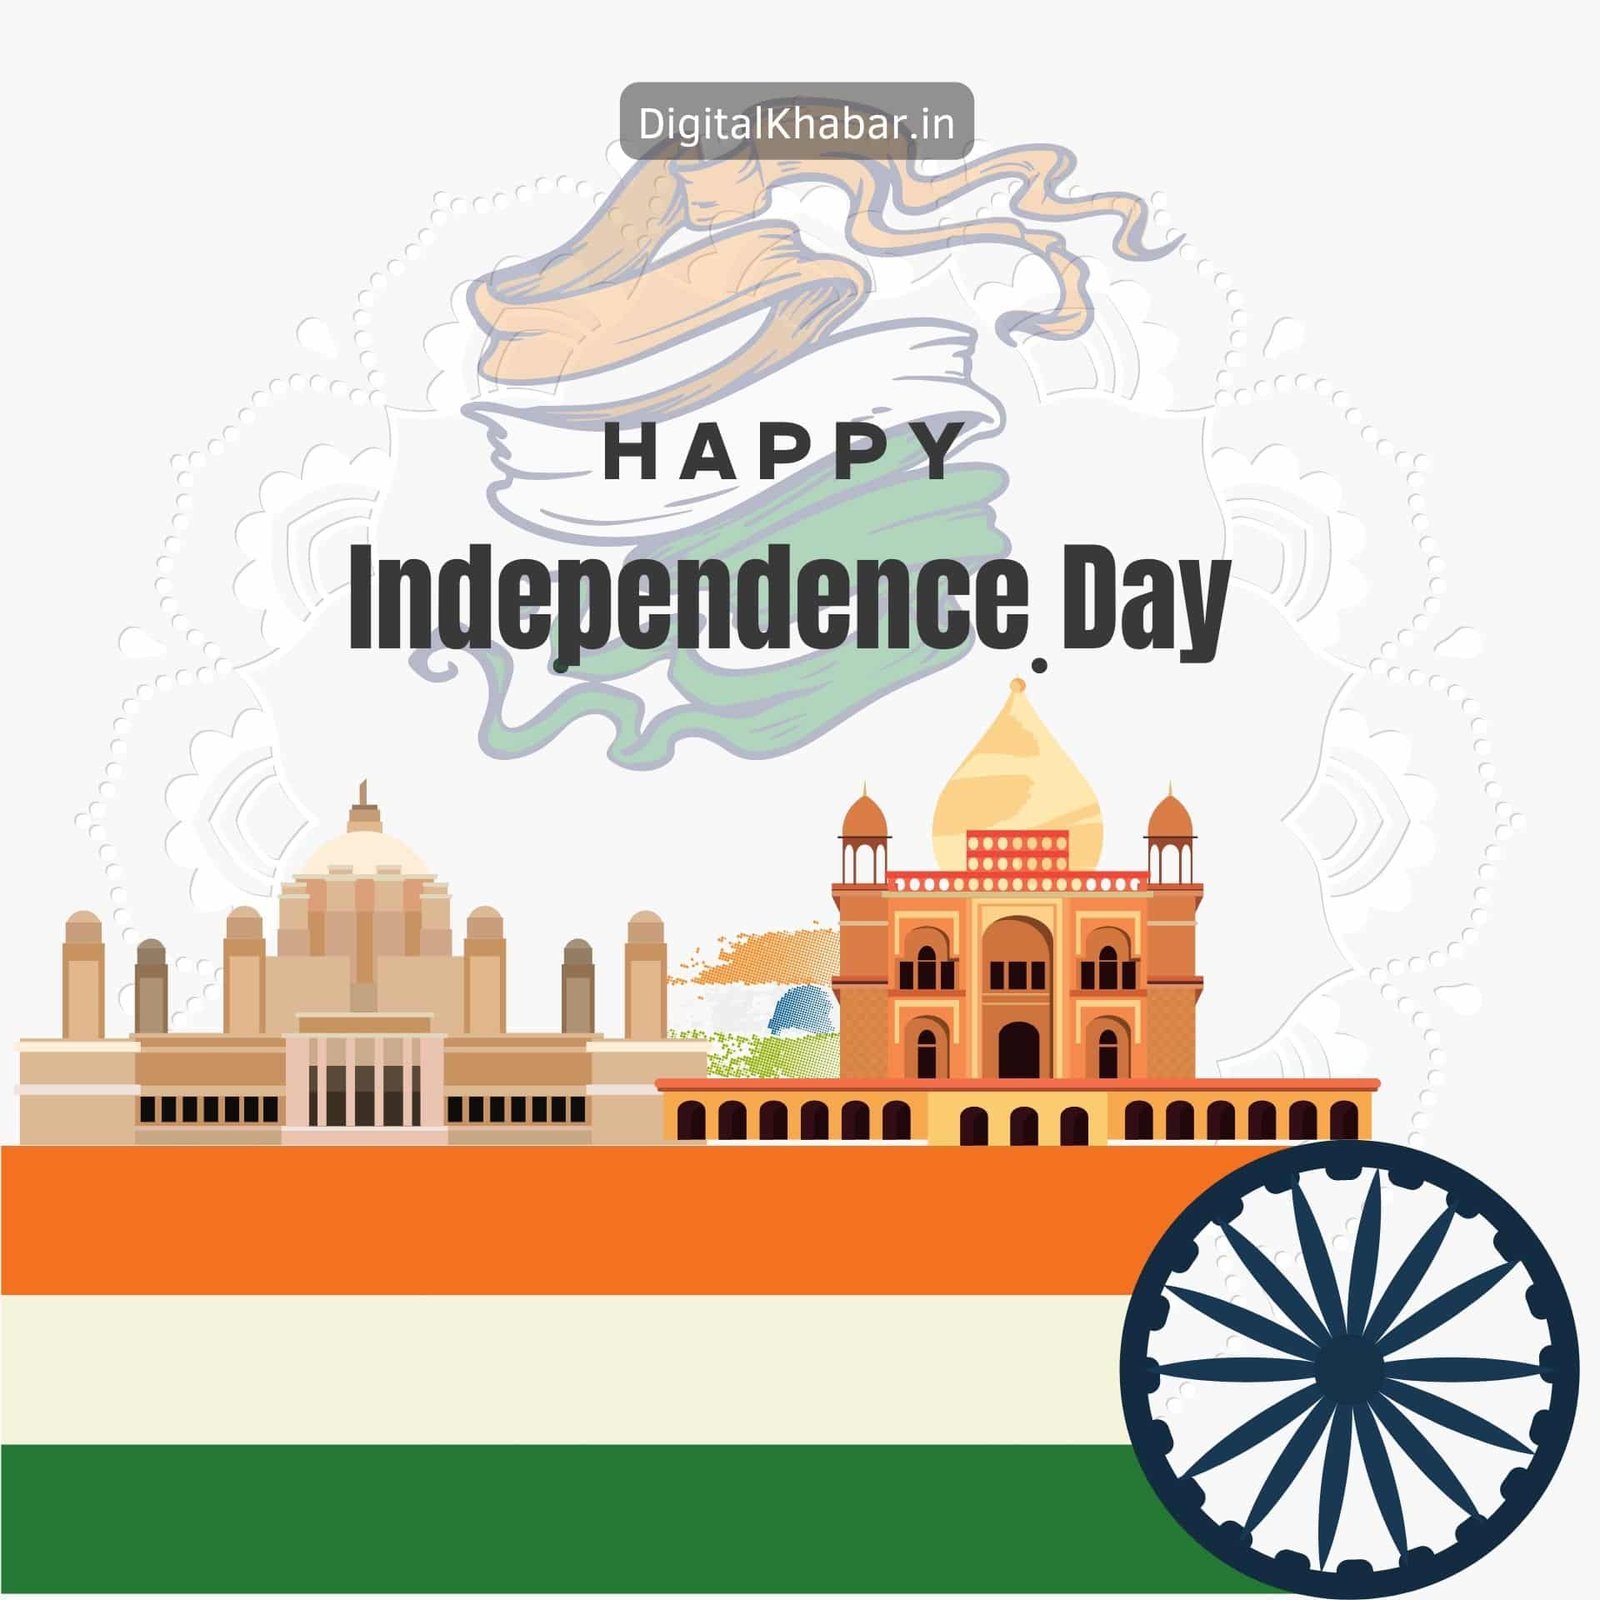 Independence Day Images for whatsapp